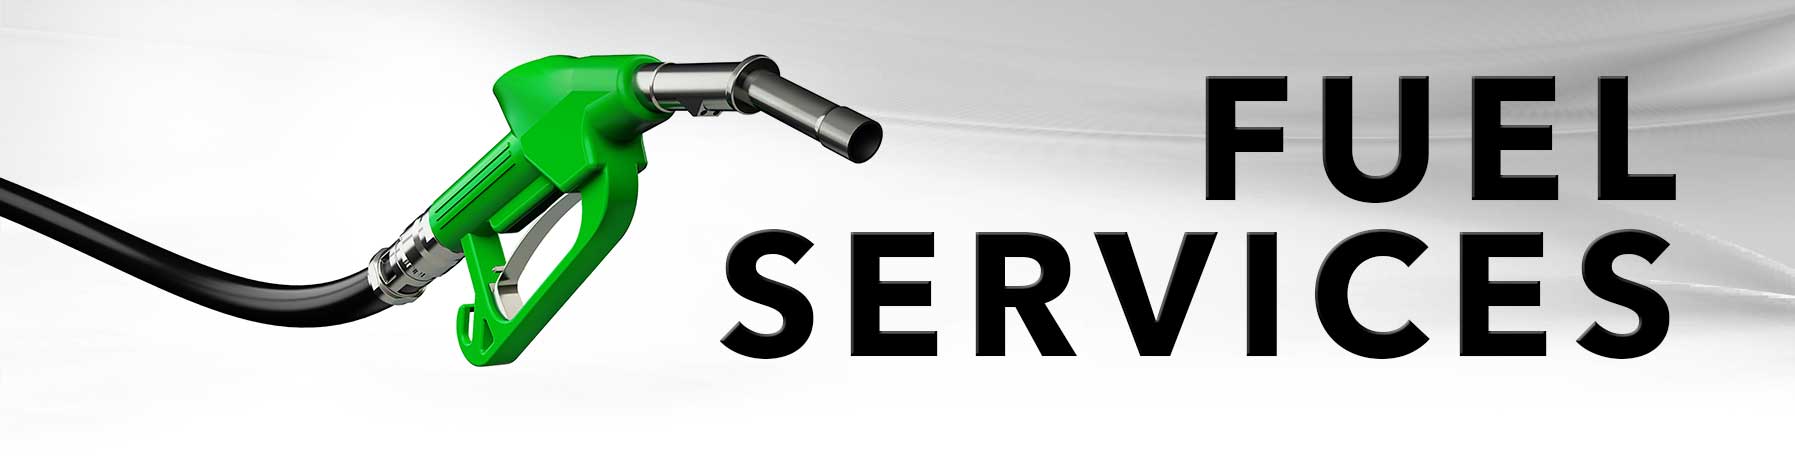 Fuel Service banner image with picture of fuel pump